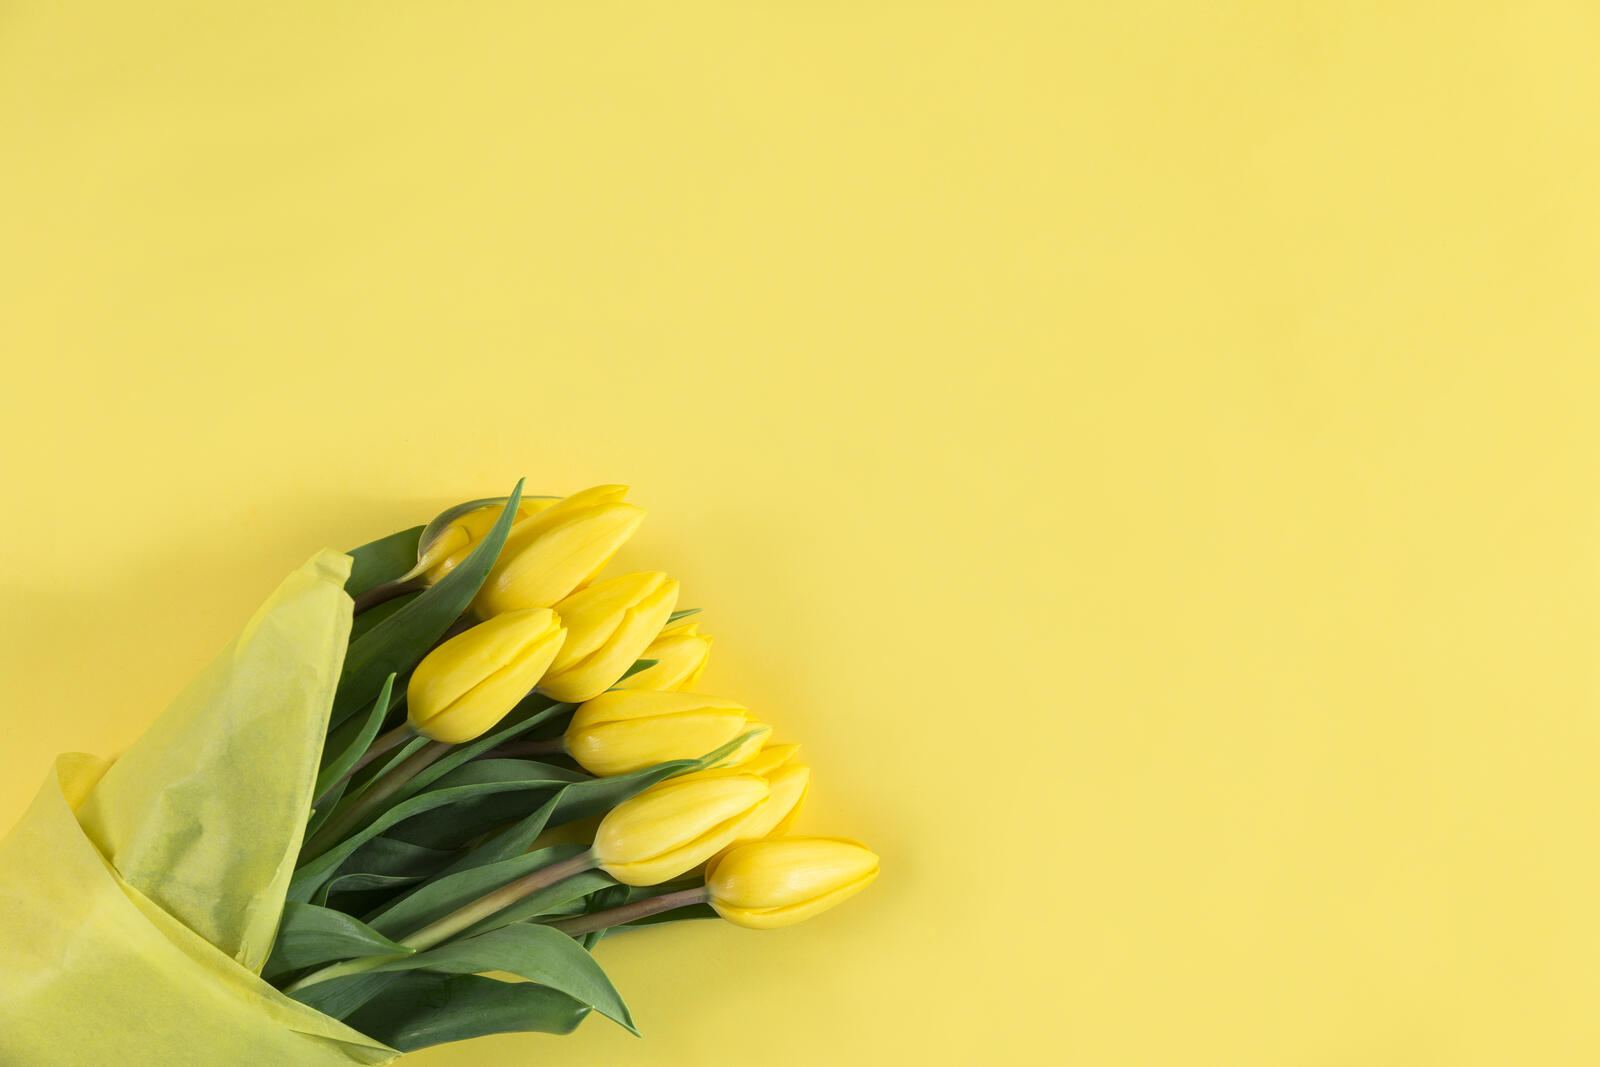 Wallpapers bouquet tulips yellow on the desktop